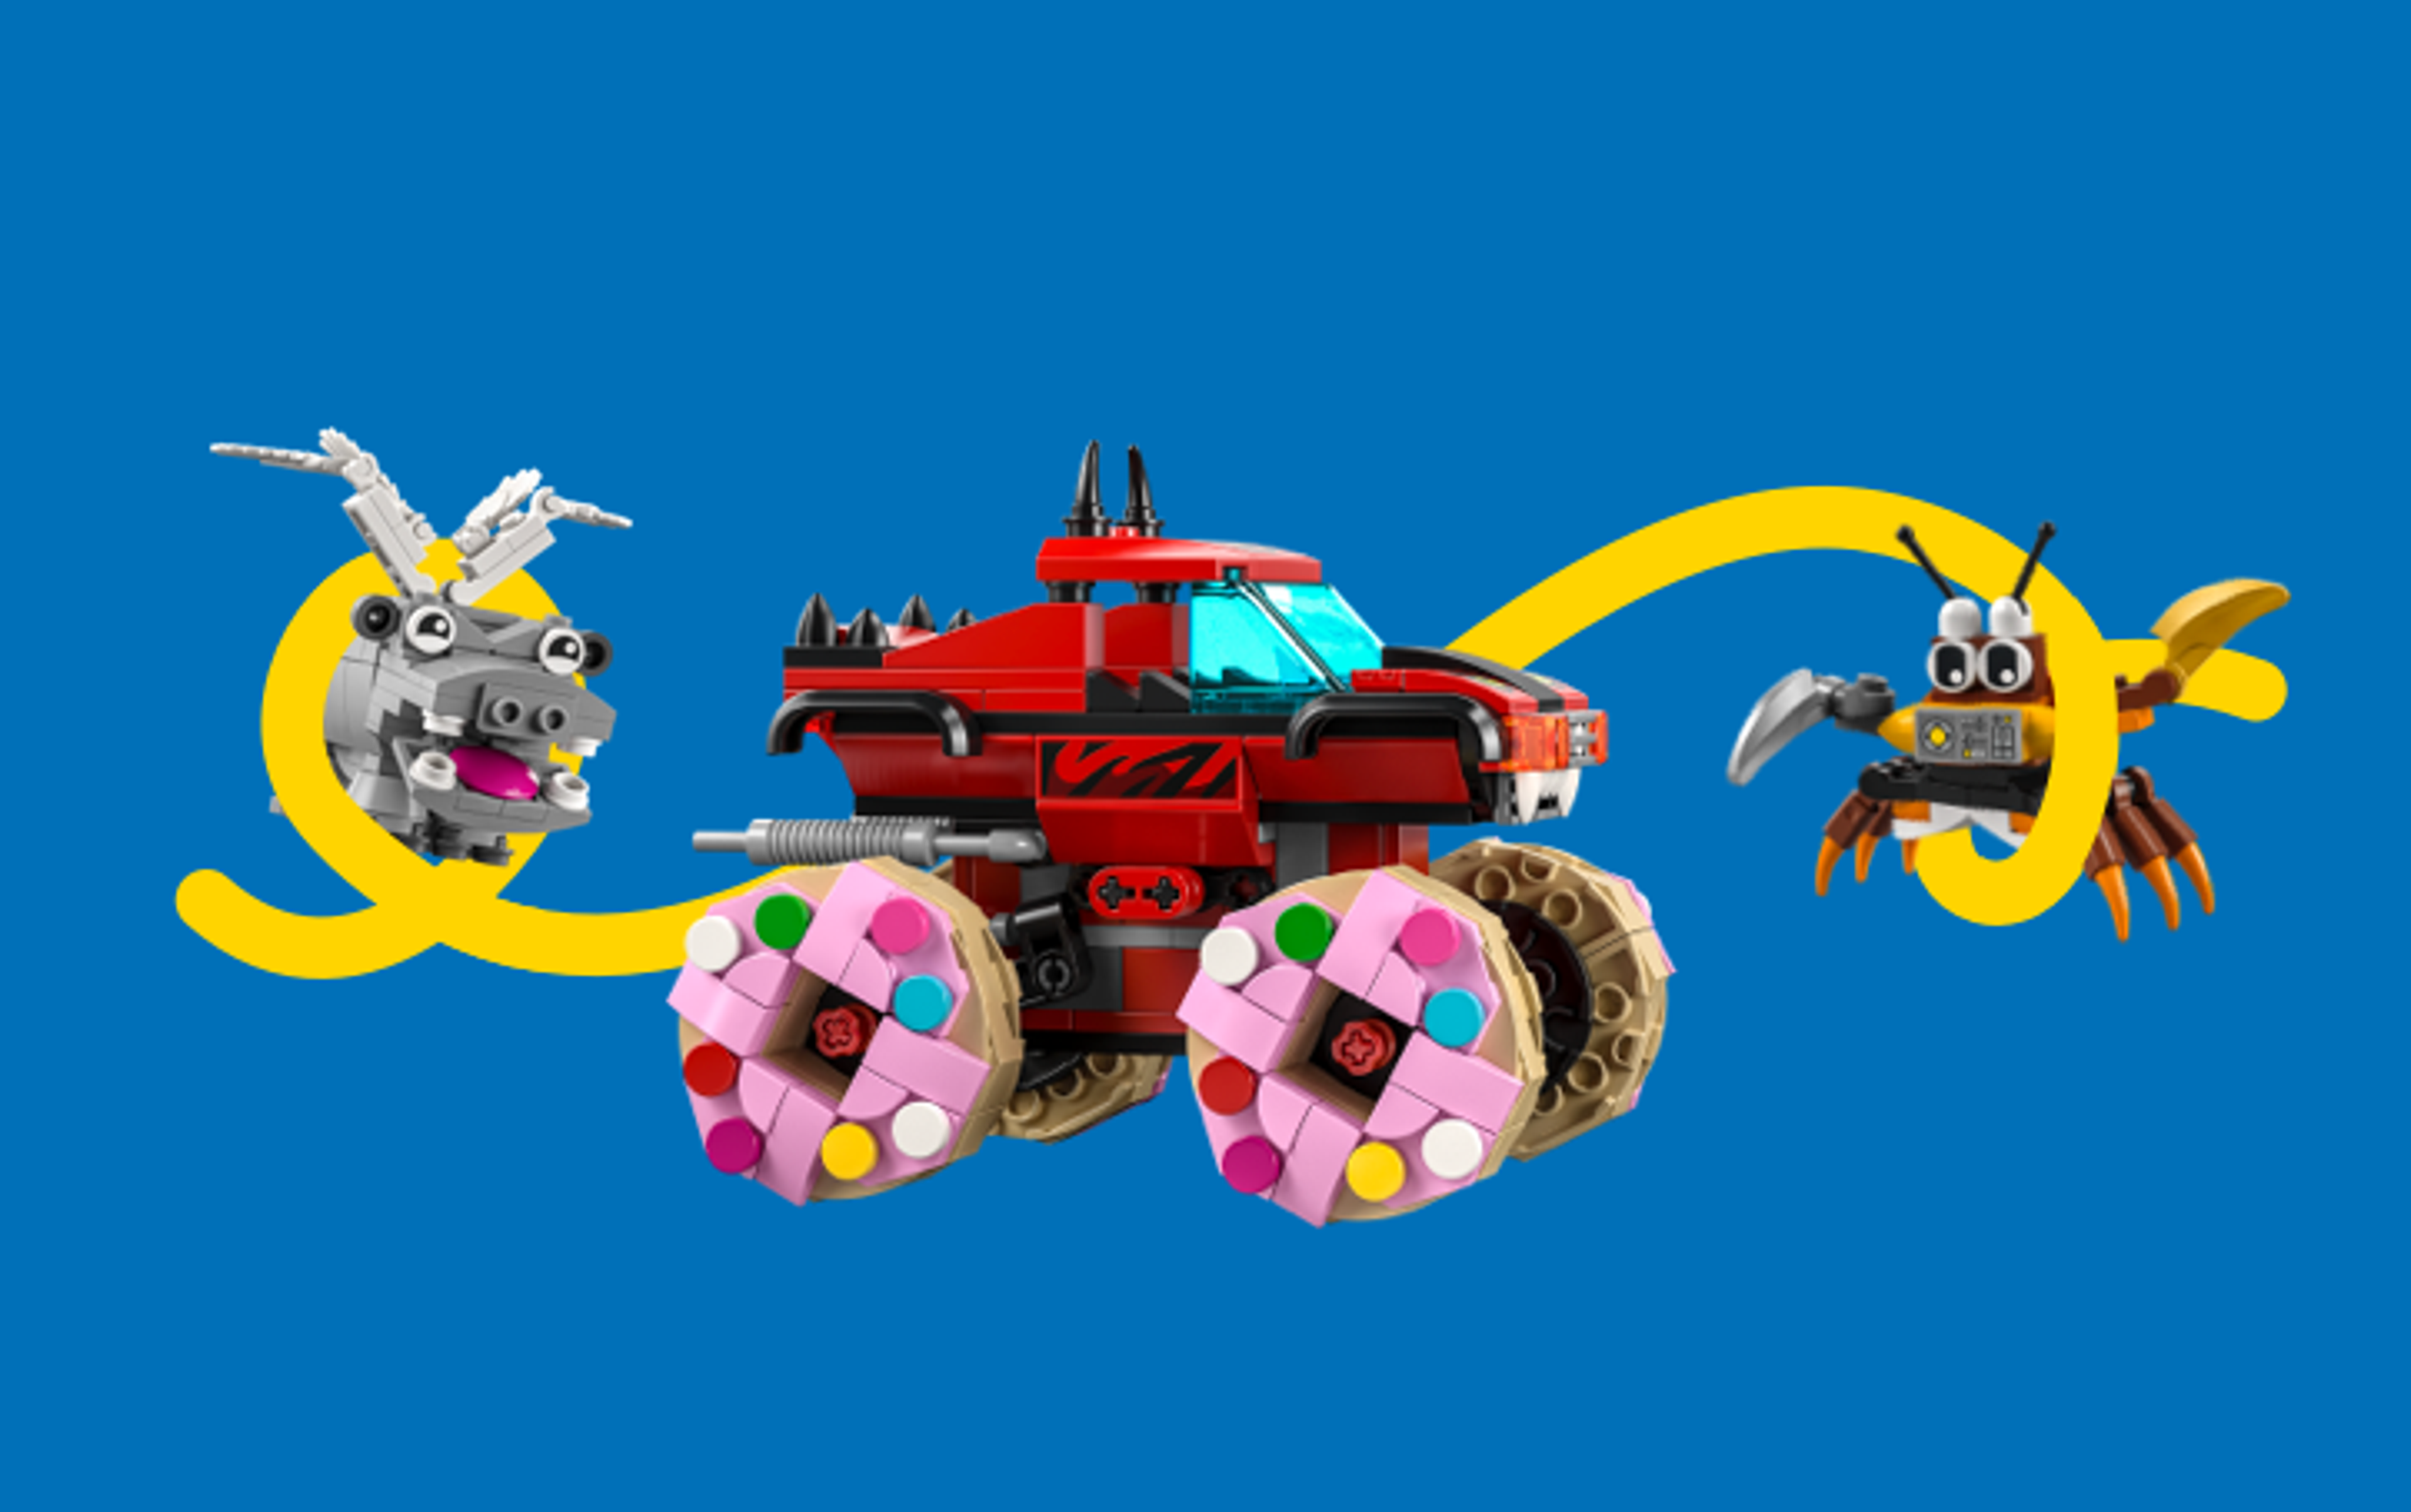 A LEGO monster truck with donuts for wheels